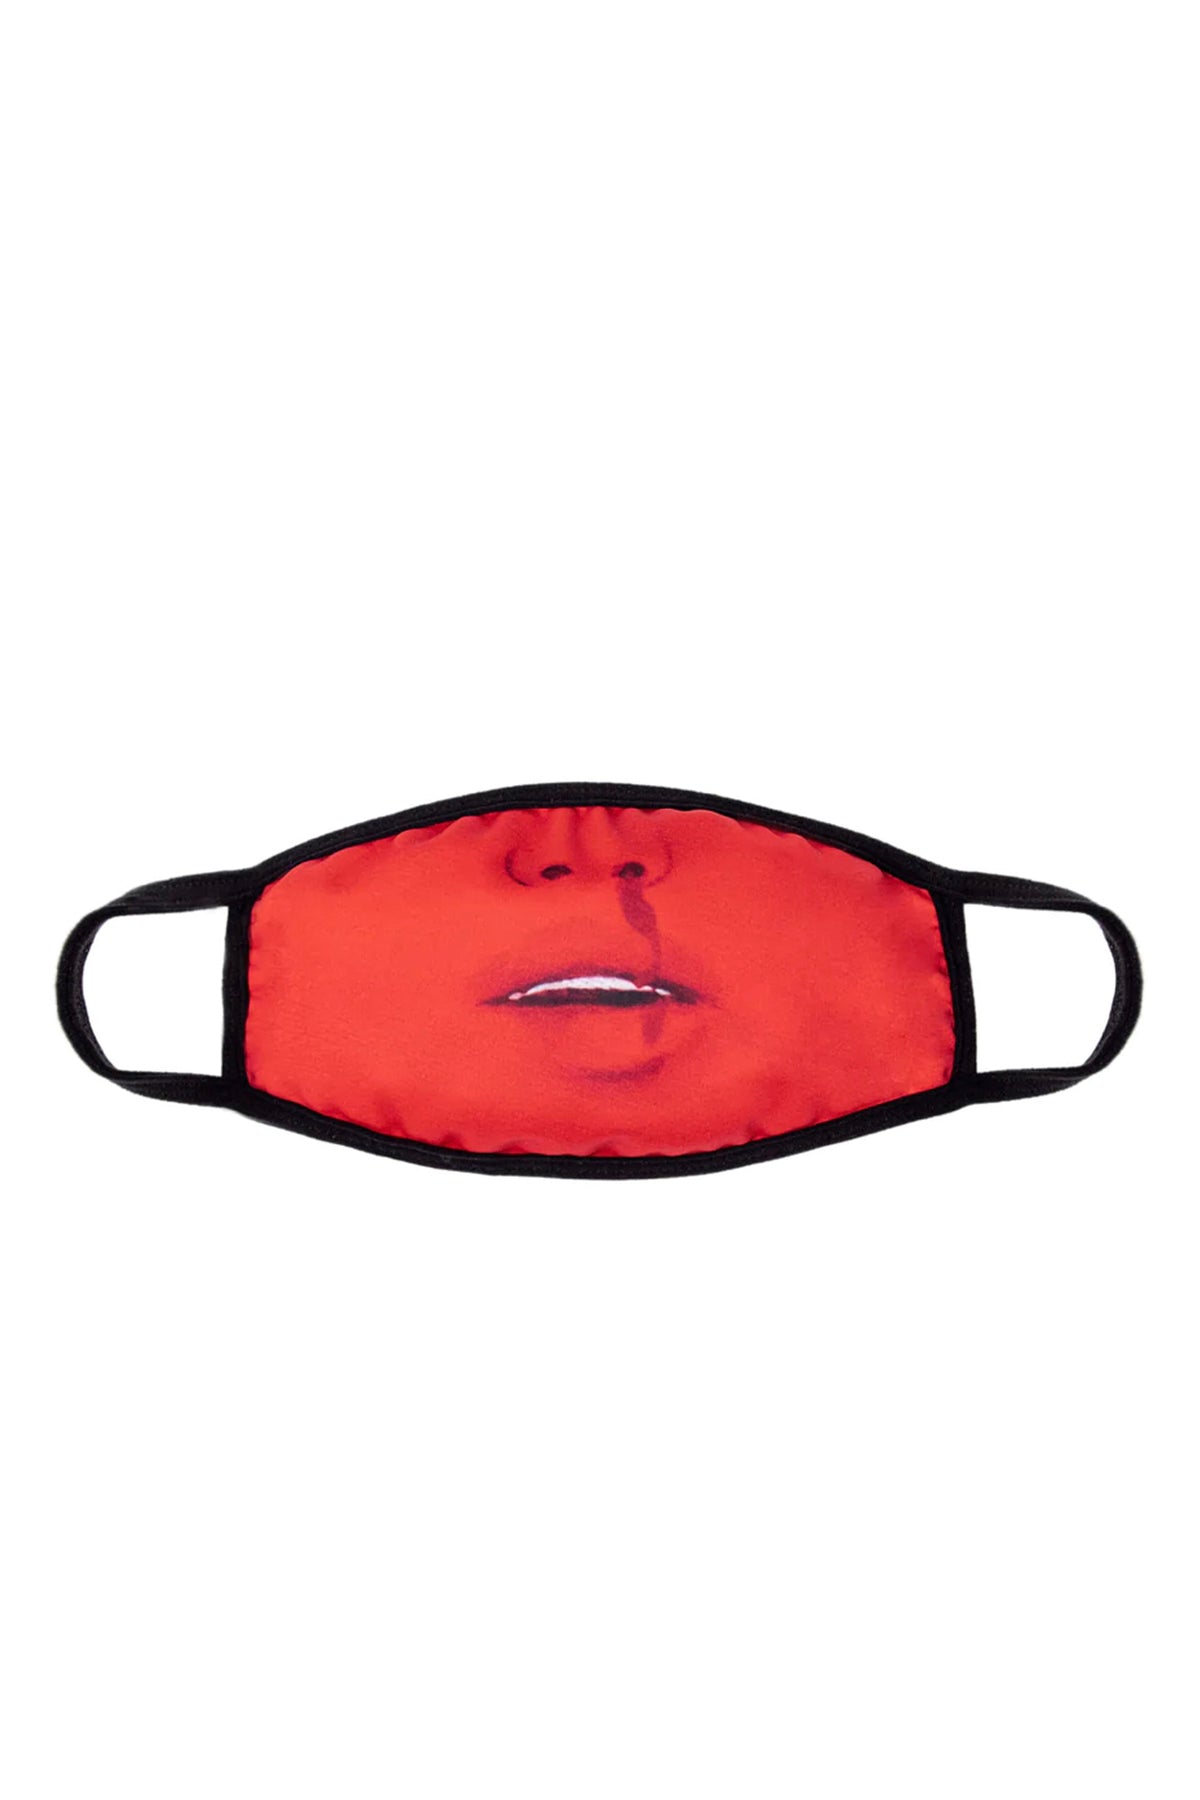 VICES MASK  / RED